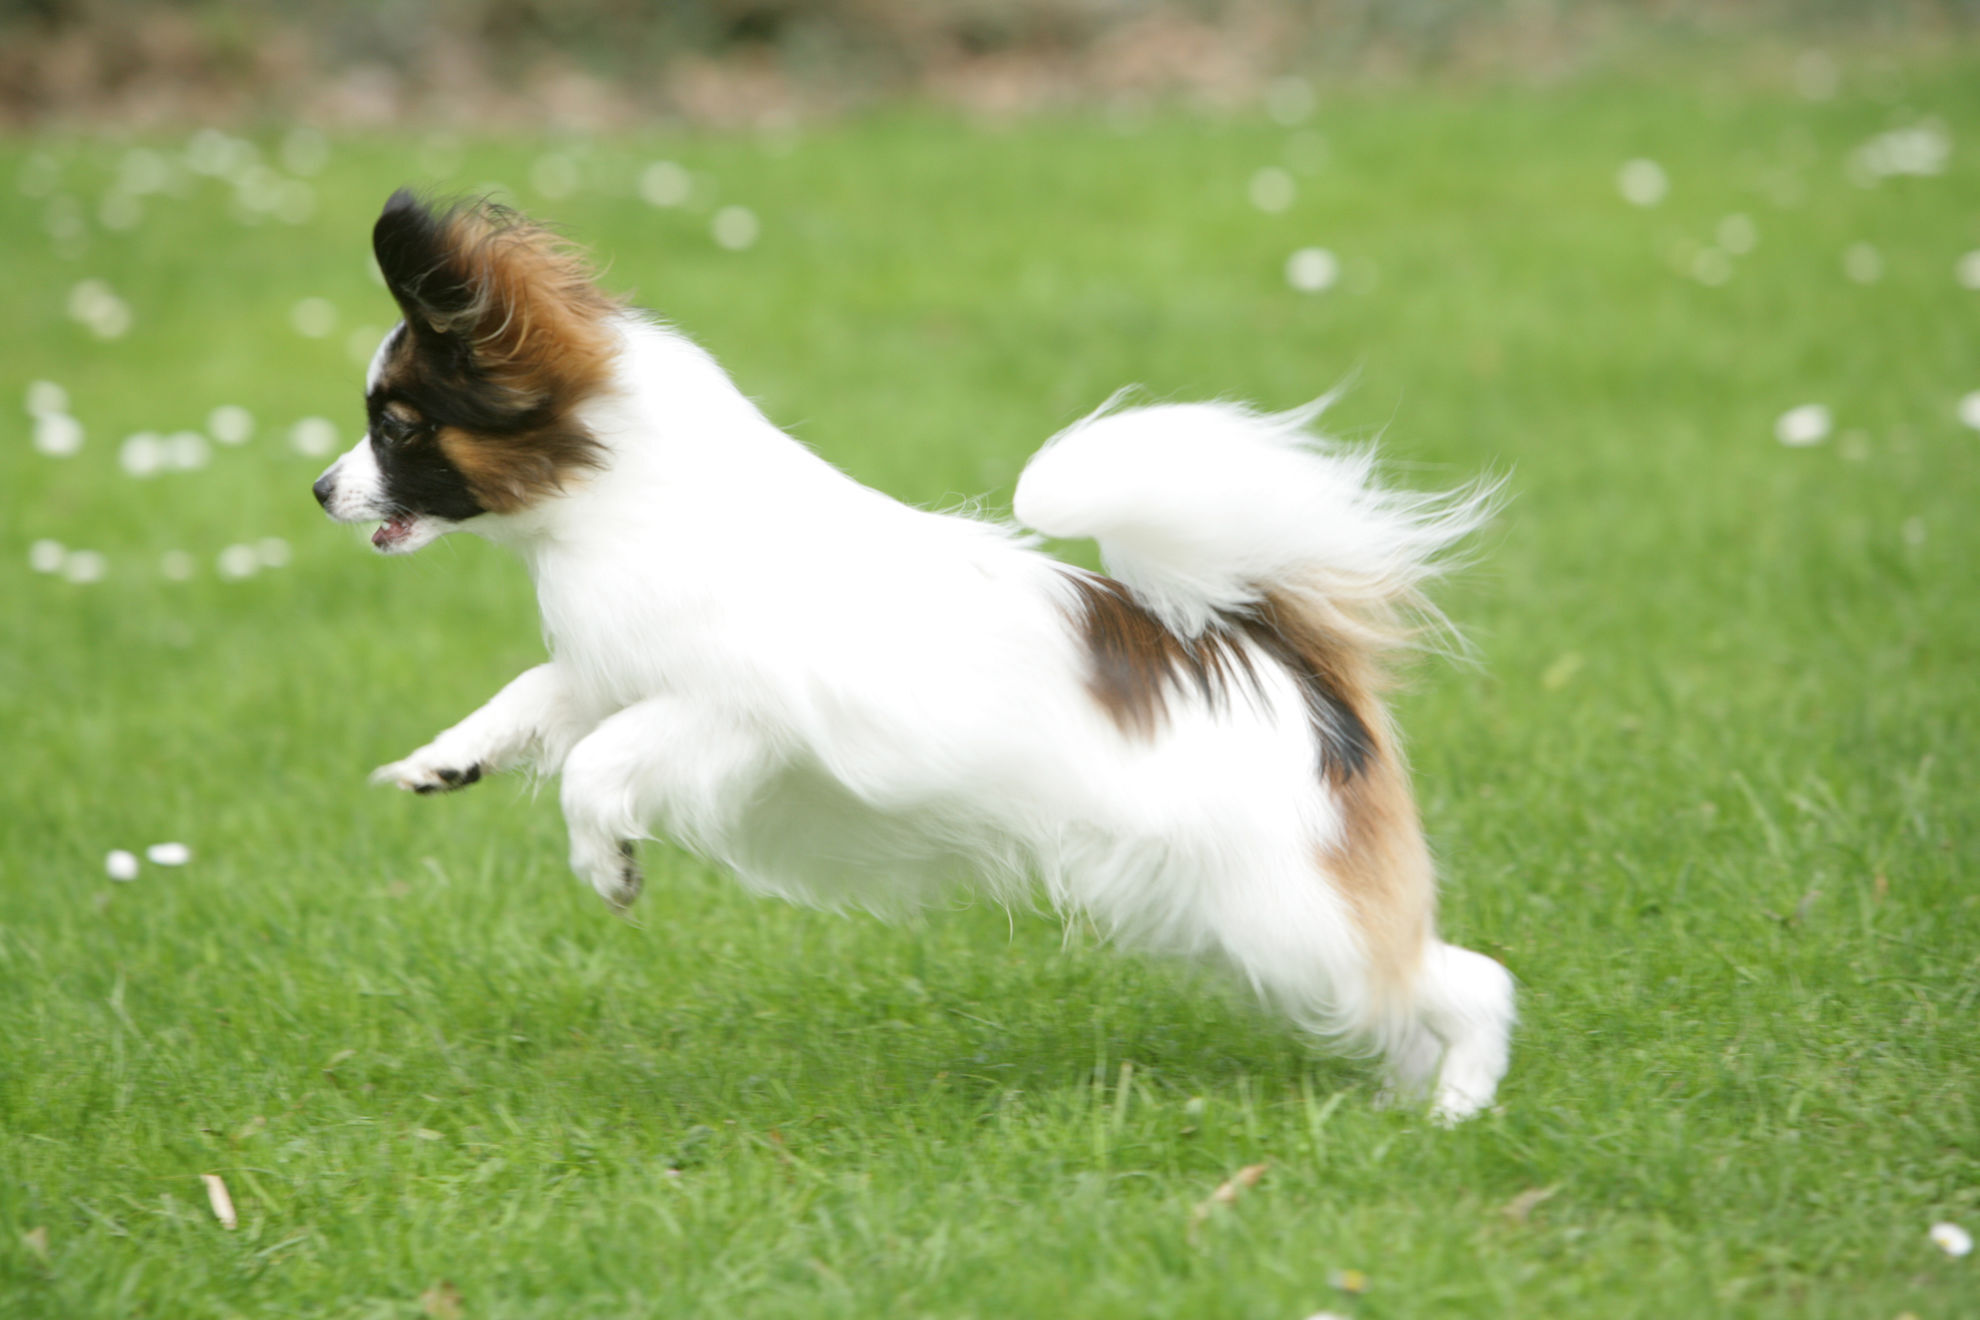  Small, energetic Papillon dog is leaping across a green lawn